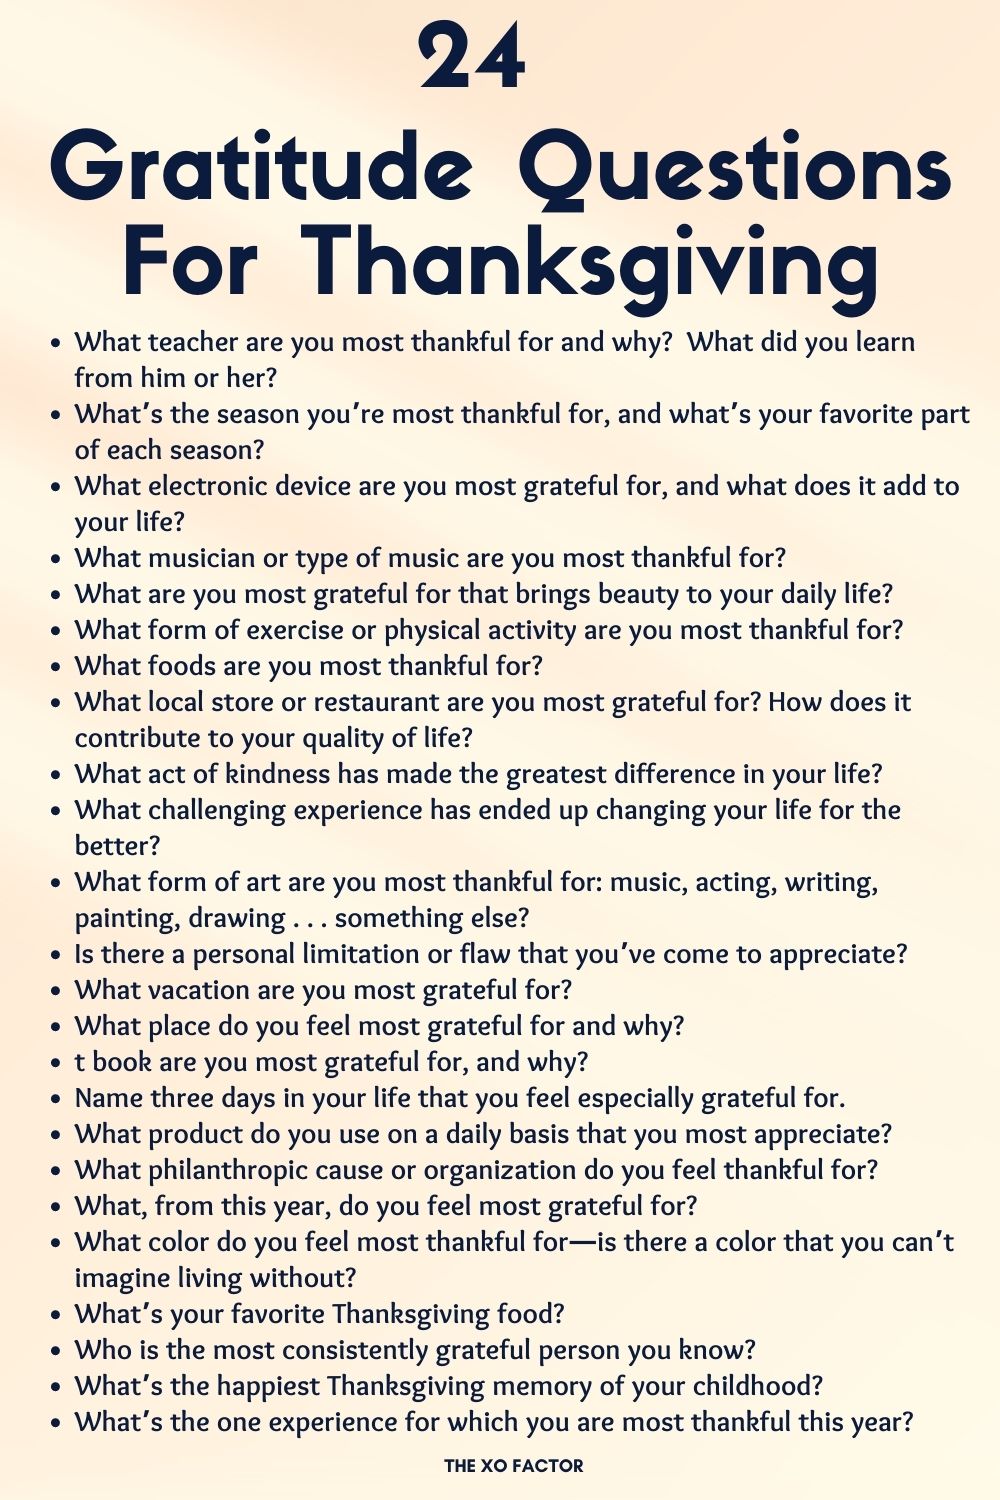 Gratitude questions for thanksgiving